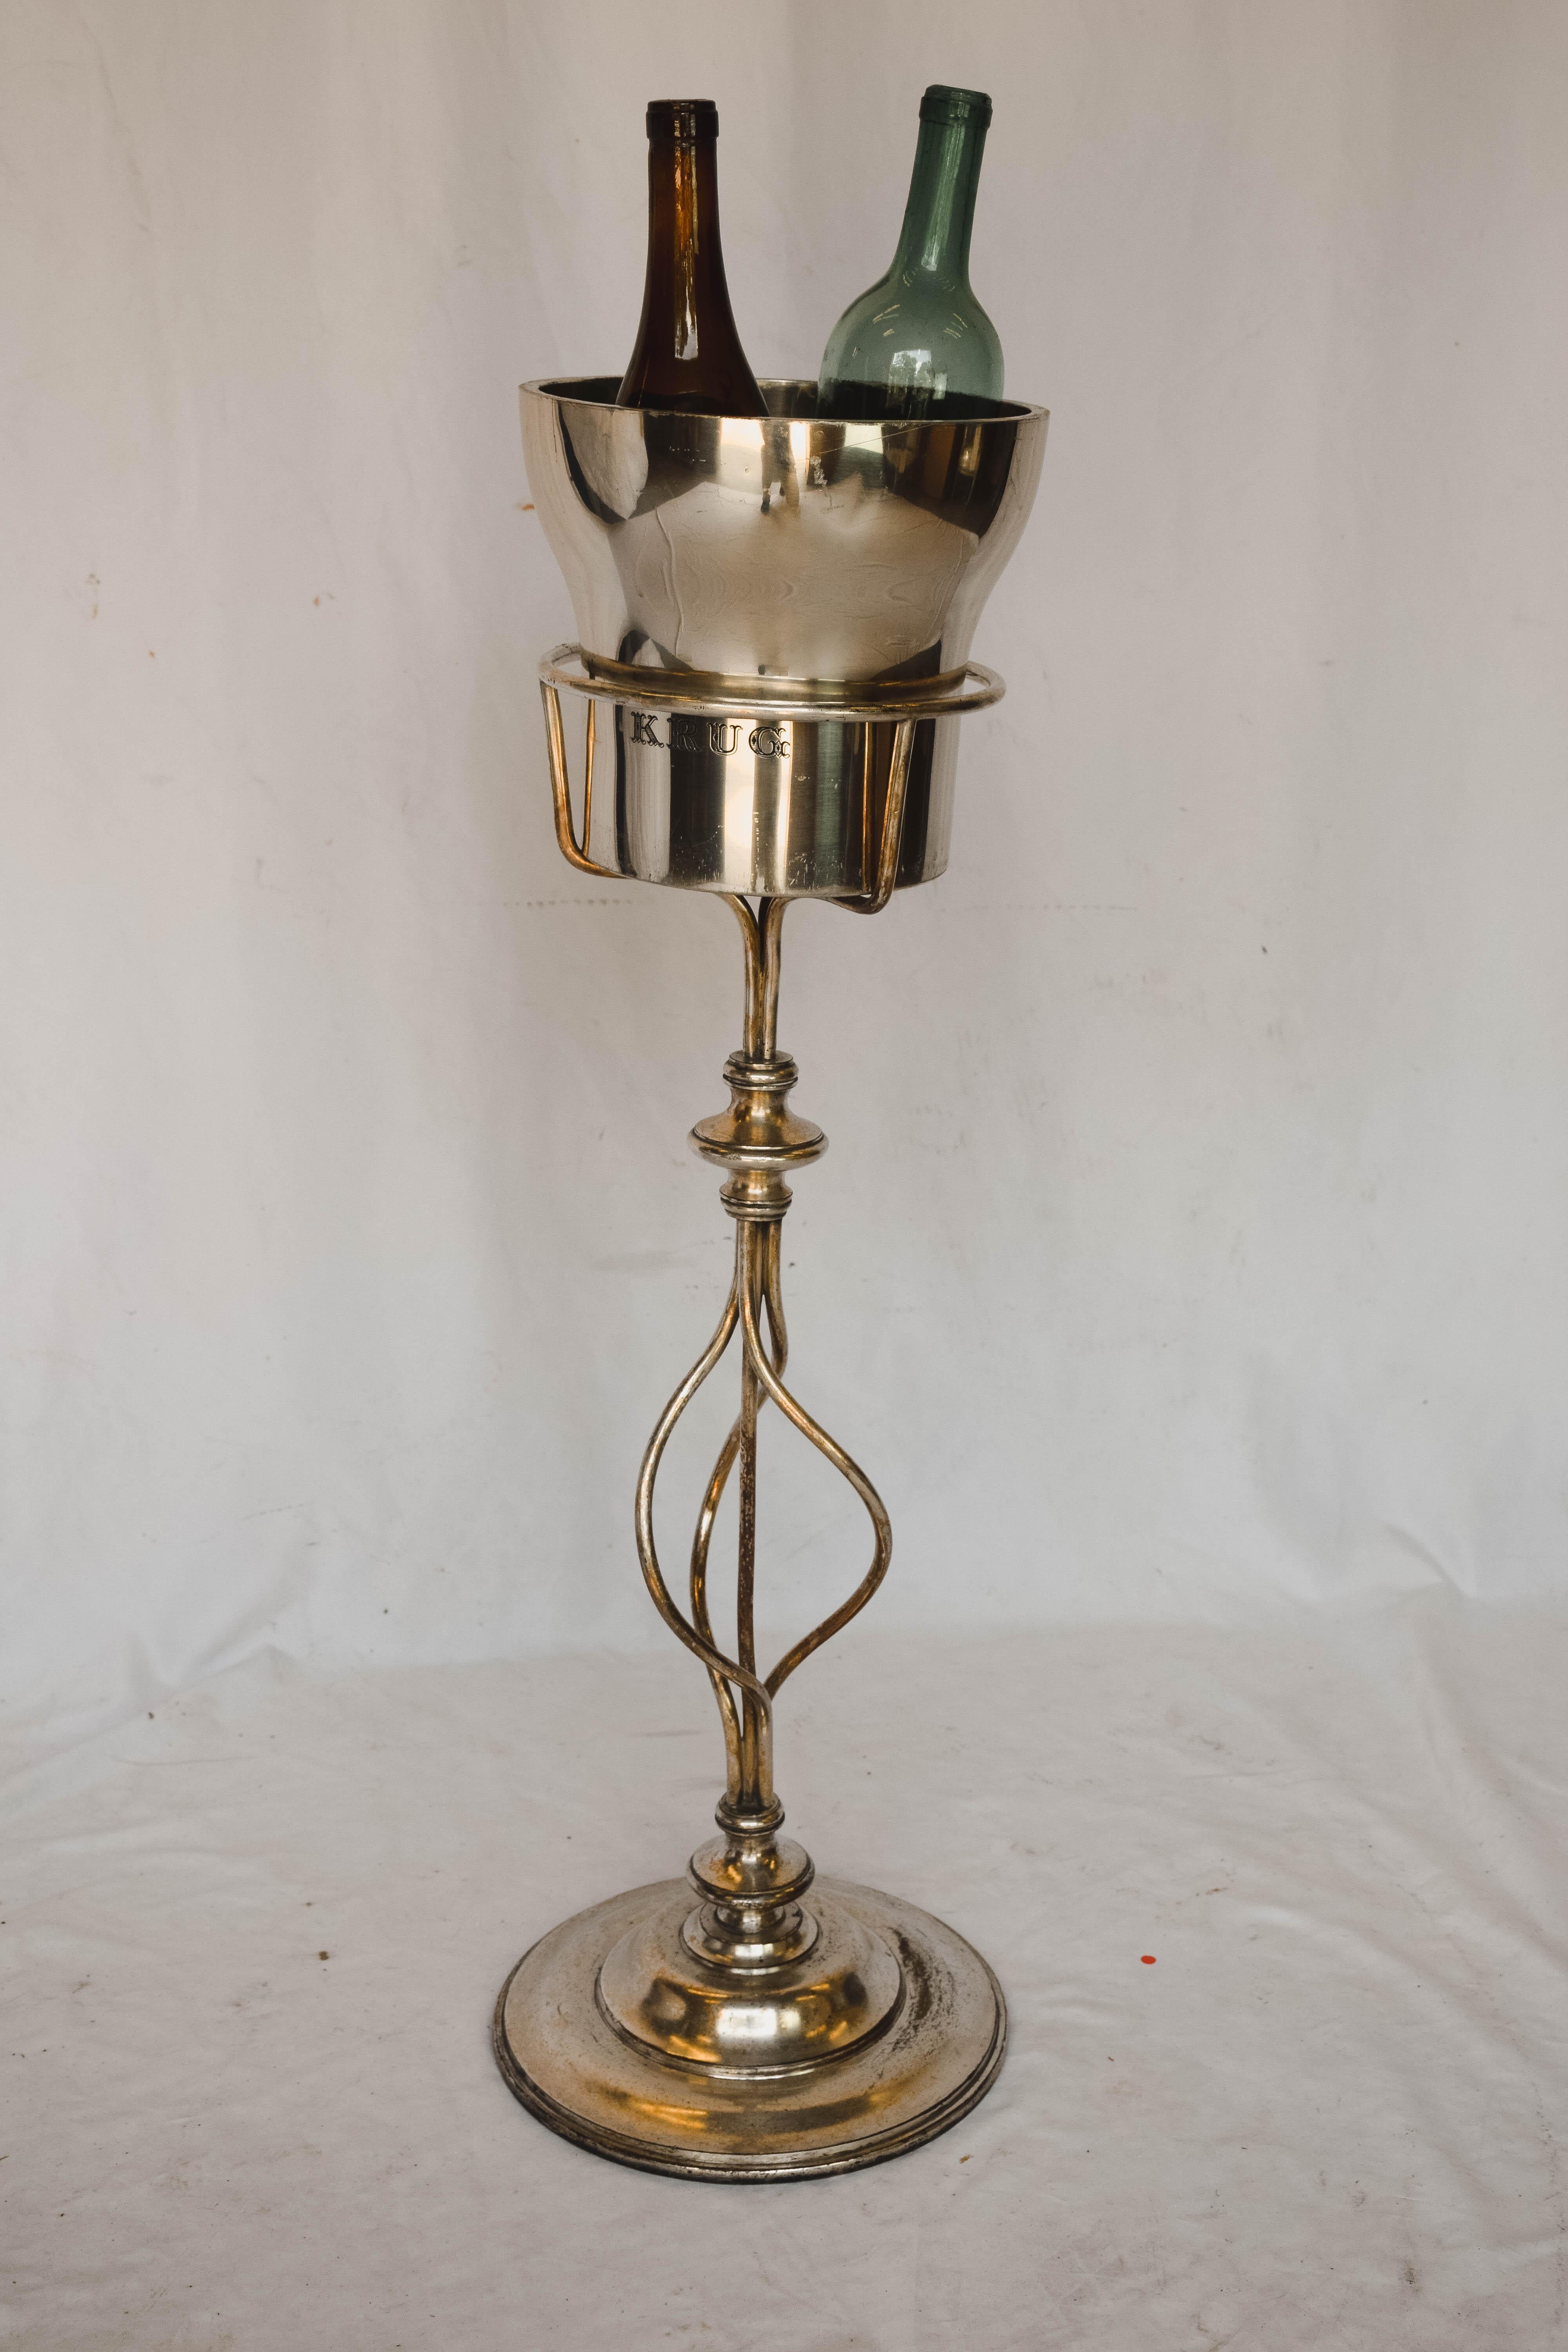 20th Century Cailar Bayard Champagne Cooler Stand For Sale